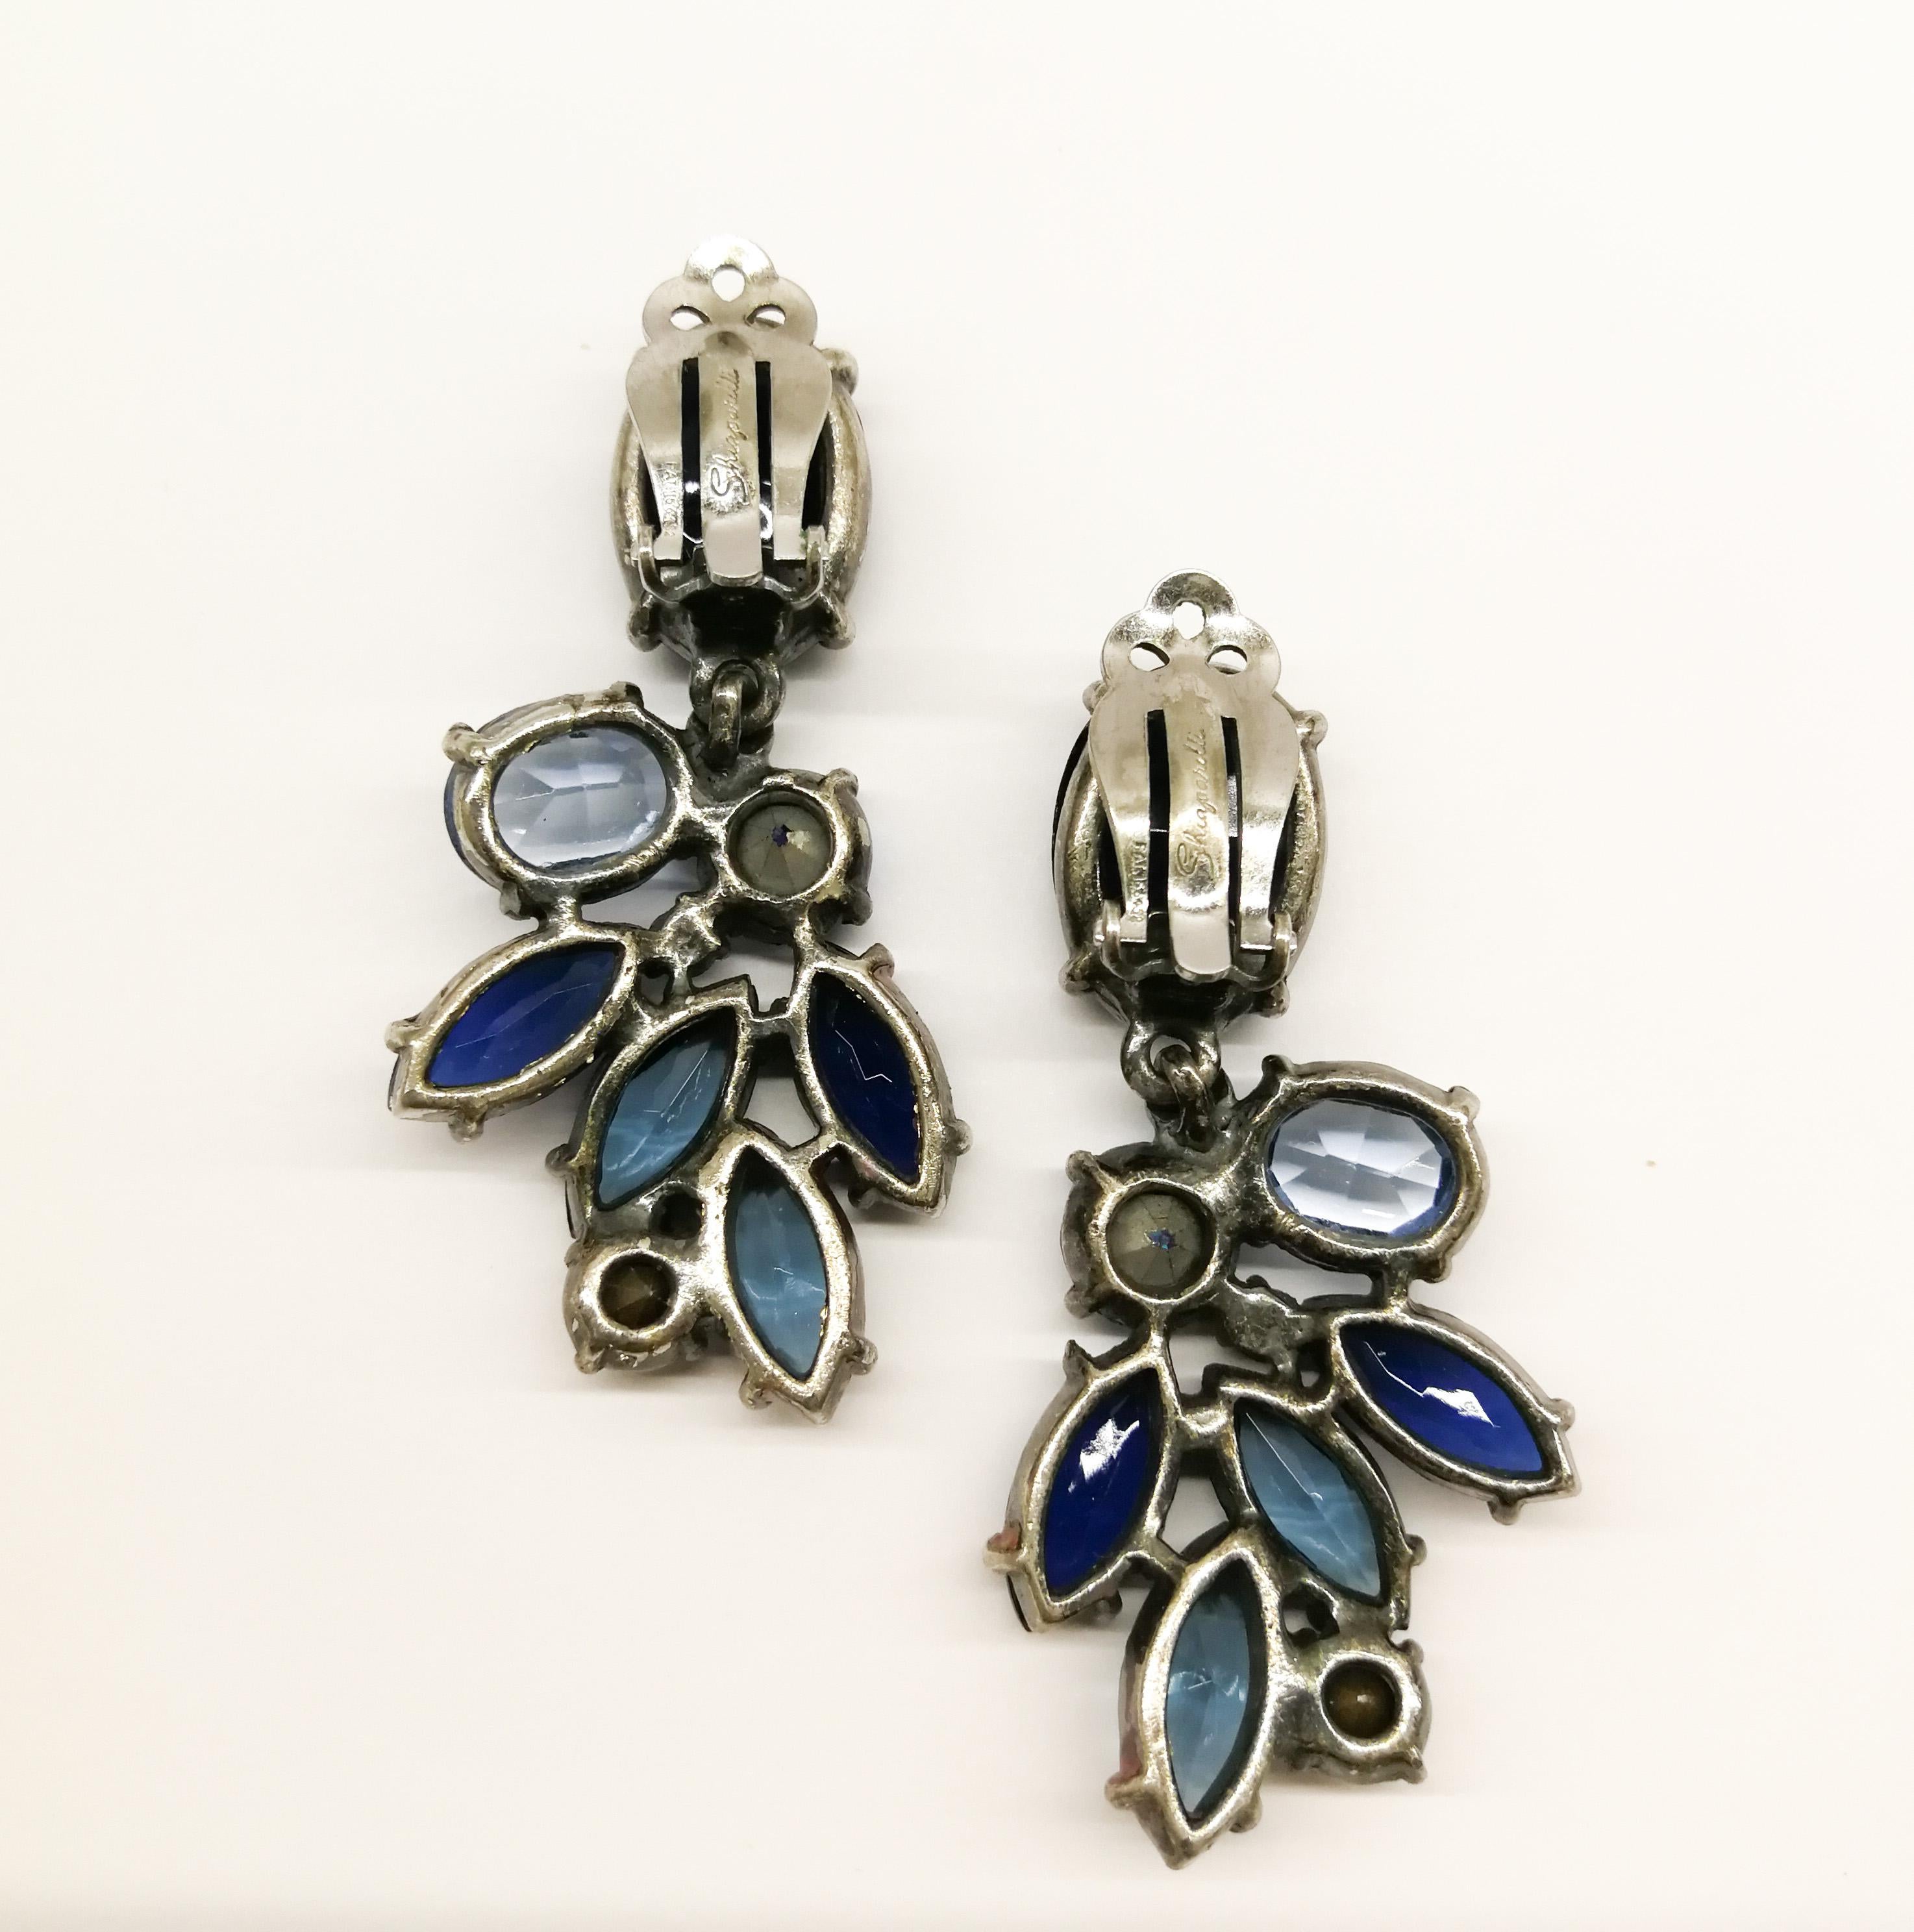 A pair of very luscious drop earrings, by Elsa Schiaparelli, from the 1950s, with assorted shapes and cuts,  and assorted shades of blue, a soft orange brown highlight, that just offsets these elegant earrings. Schiaparelli earrings from this period